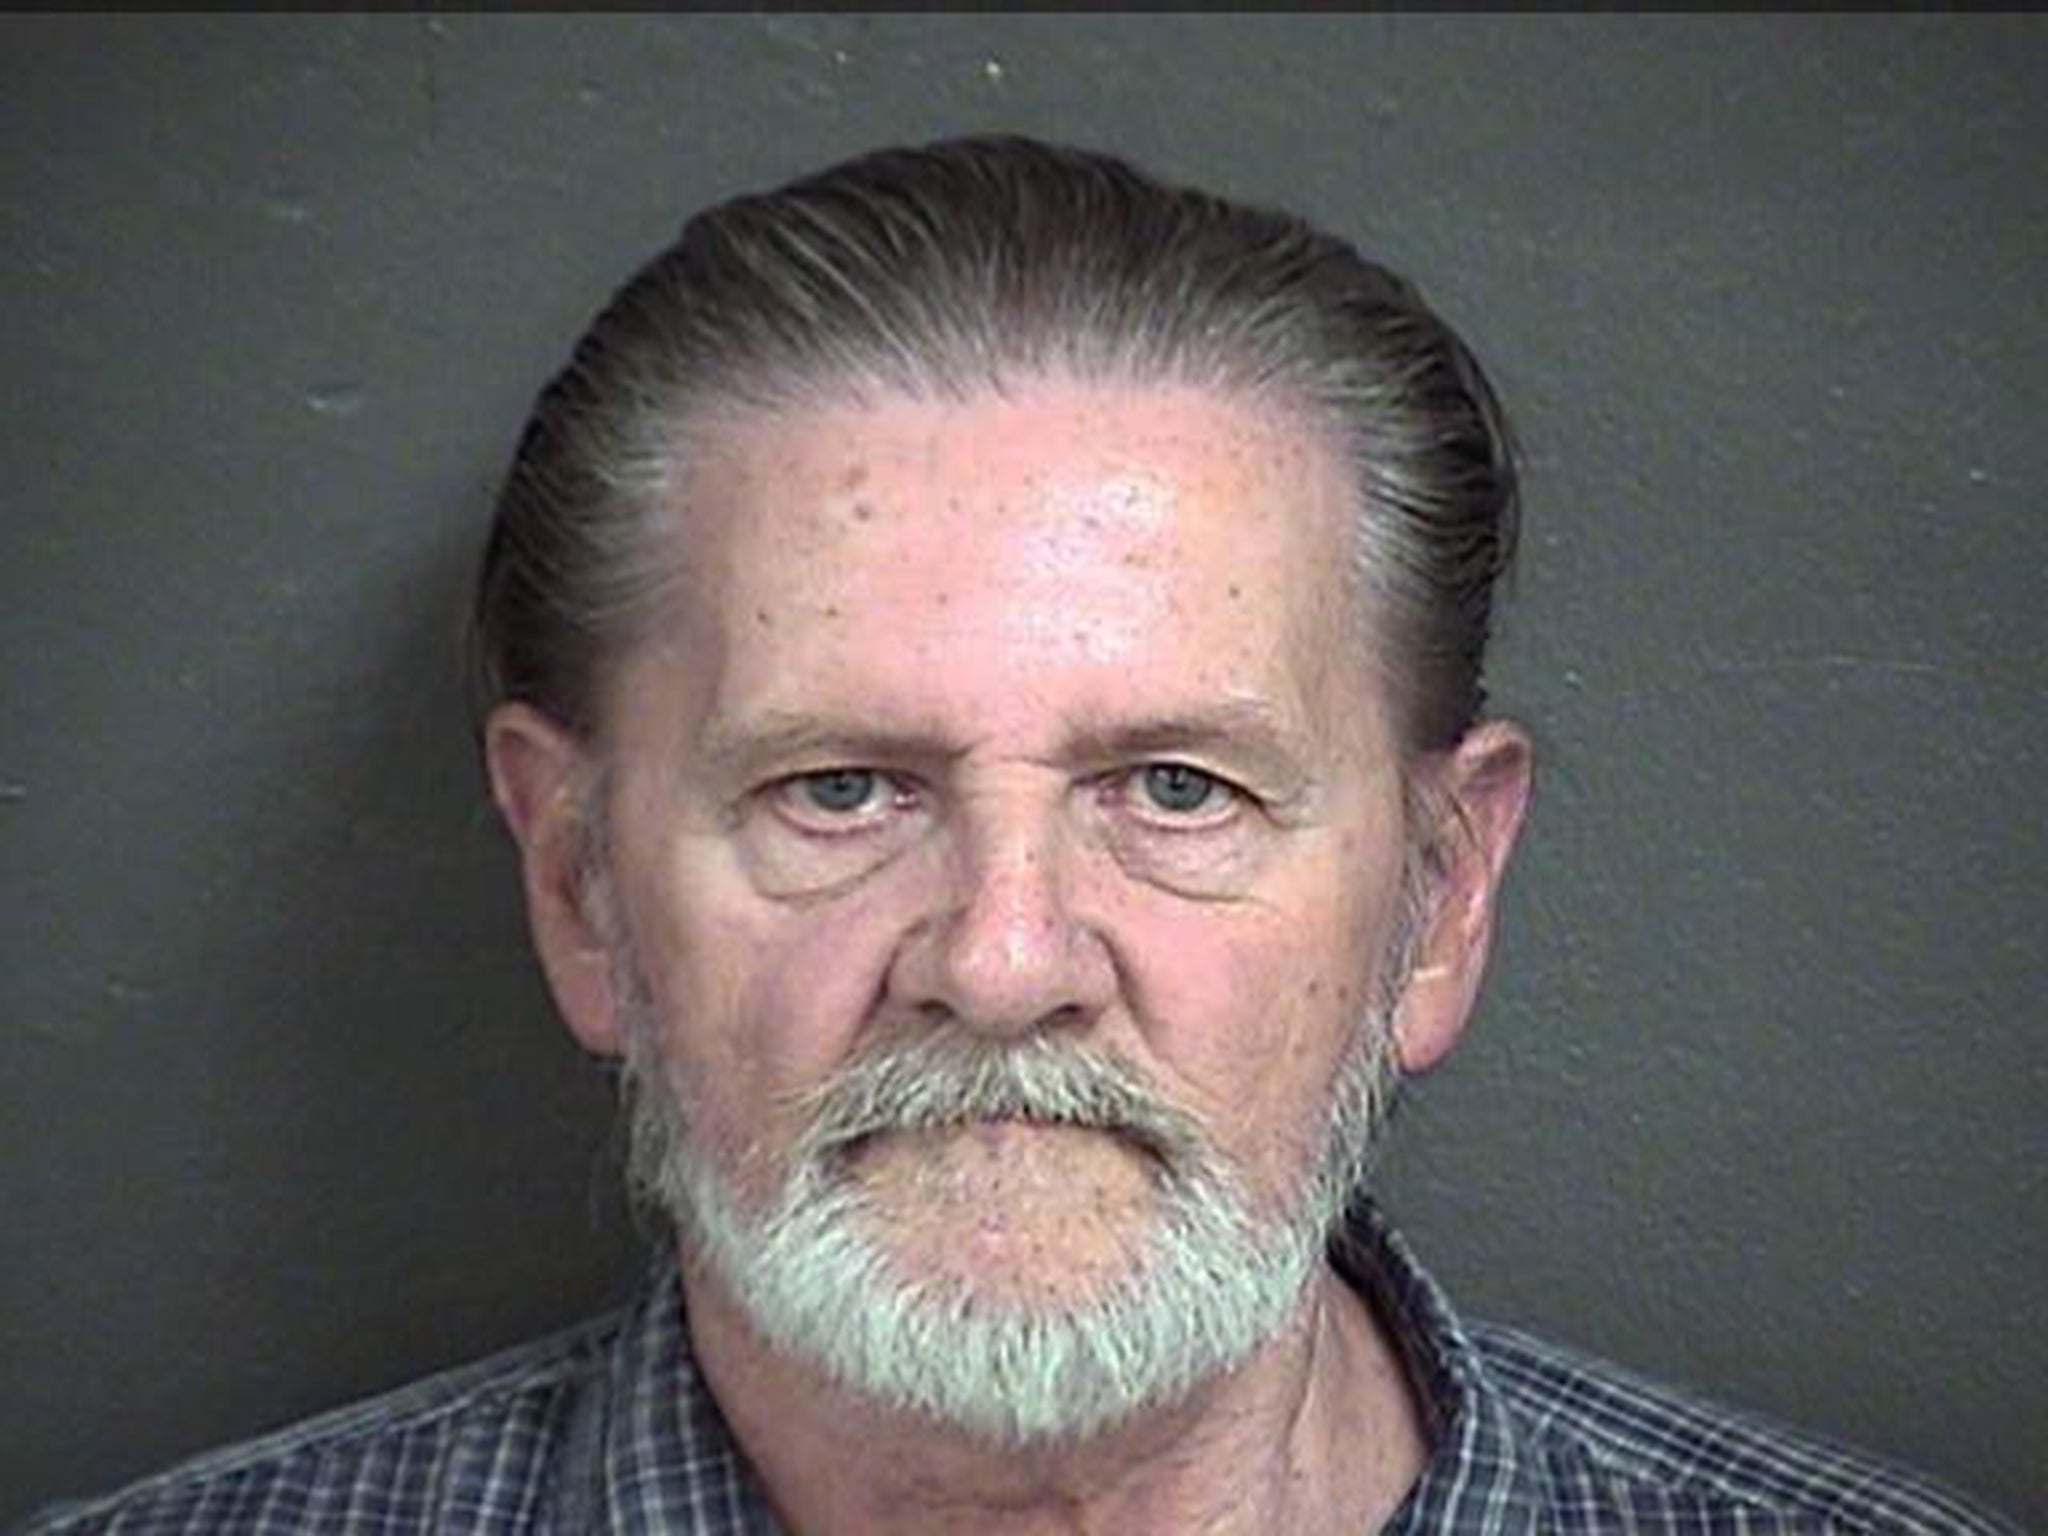 Lawrence Ripple, 70, is sentenced to house arrest after robbing a bank to get away from his wife